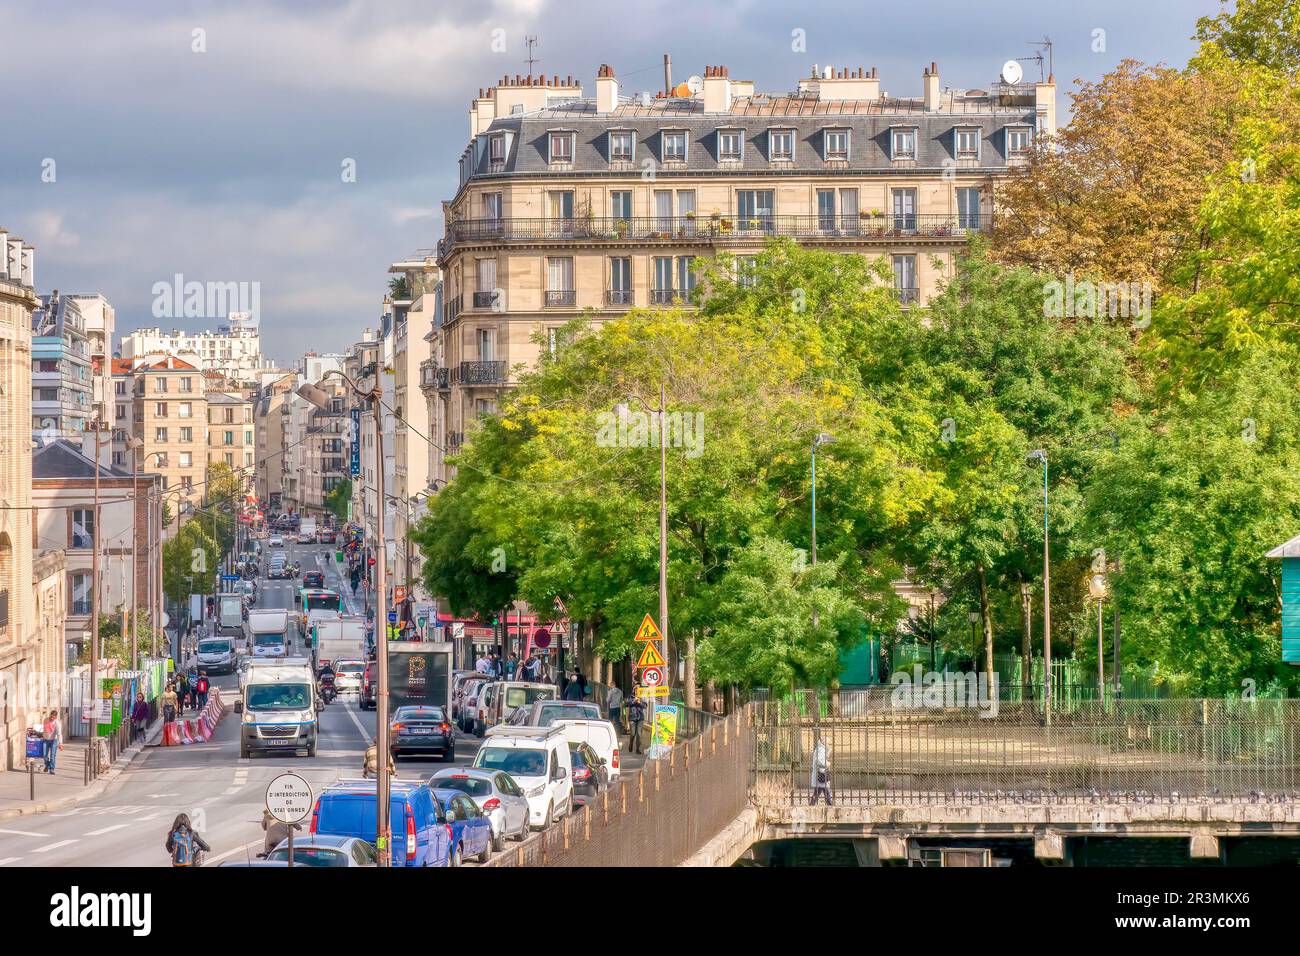 Paris, France - Oct 17, 2016. View of a residential neighborhood along Rue Cardinet in the Batignolles district of the 17th arrondissement. Stock Photo